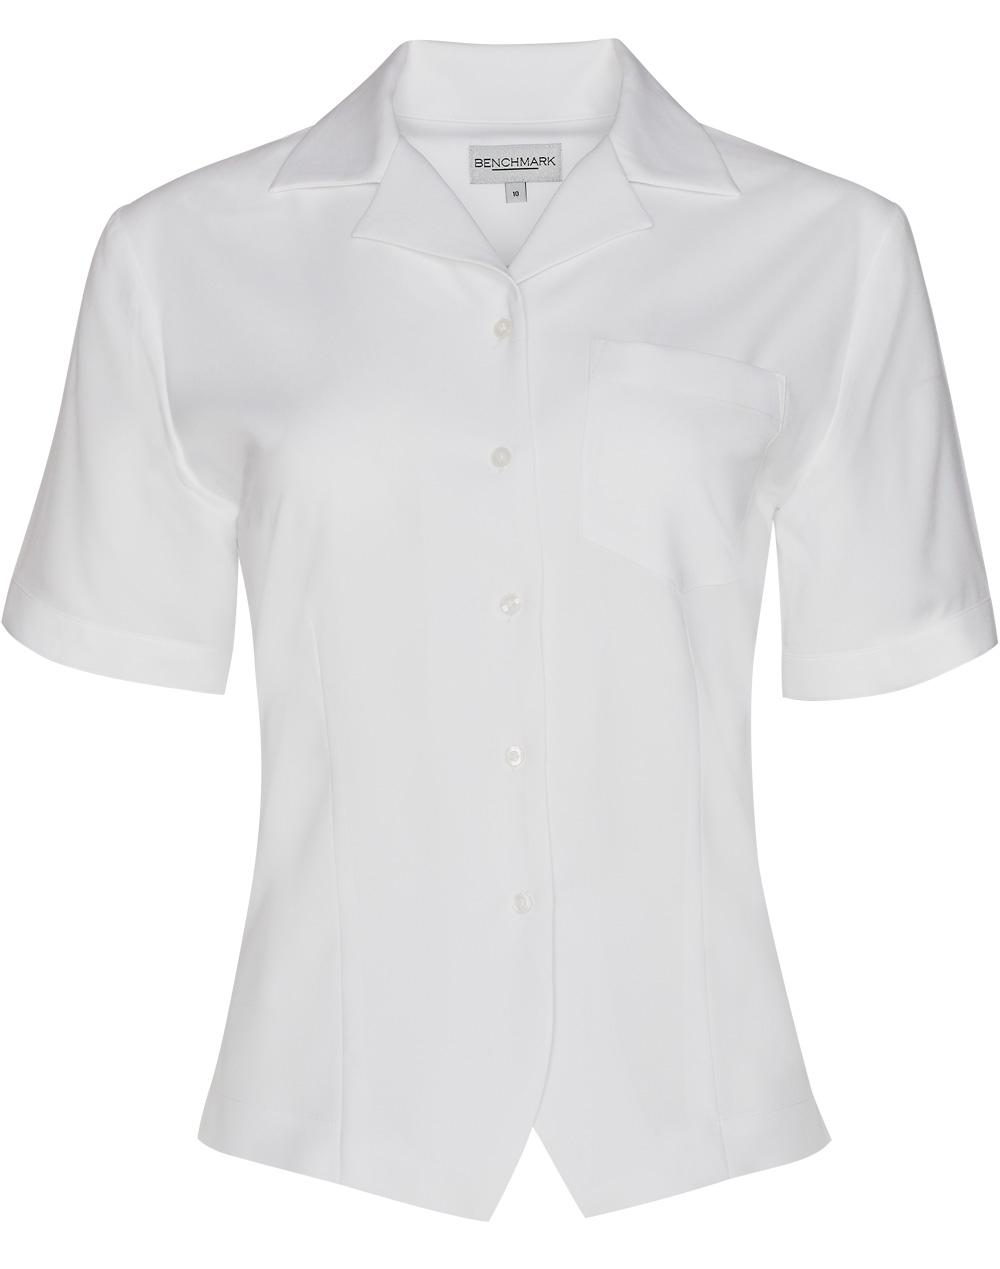 M8614S Women’s CoolDry Short Sleeve Overblouse